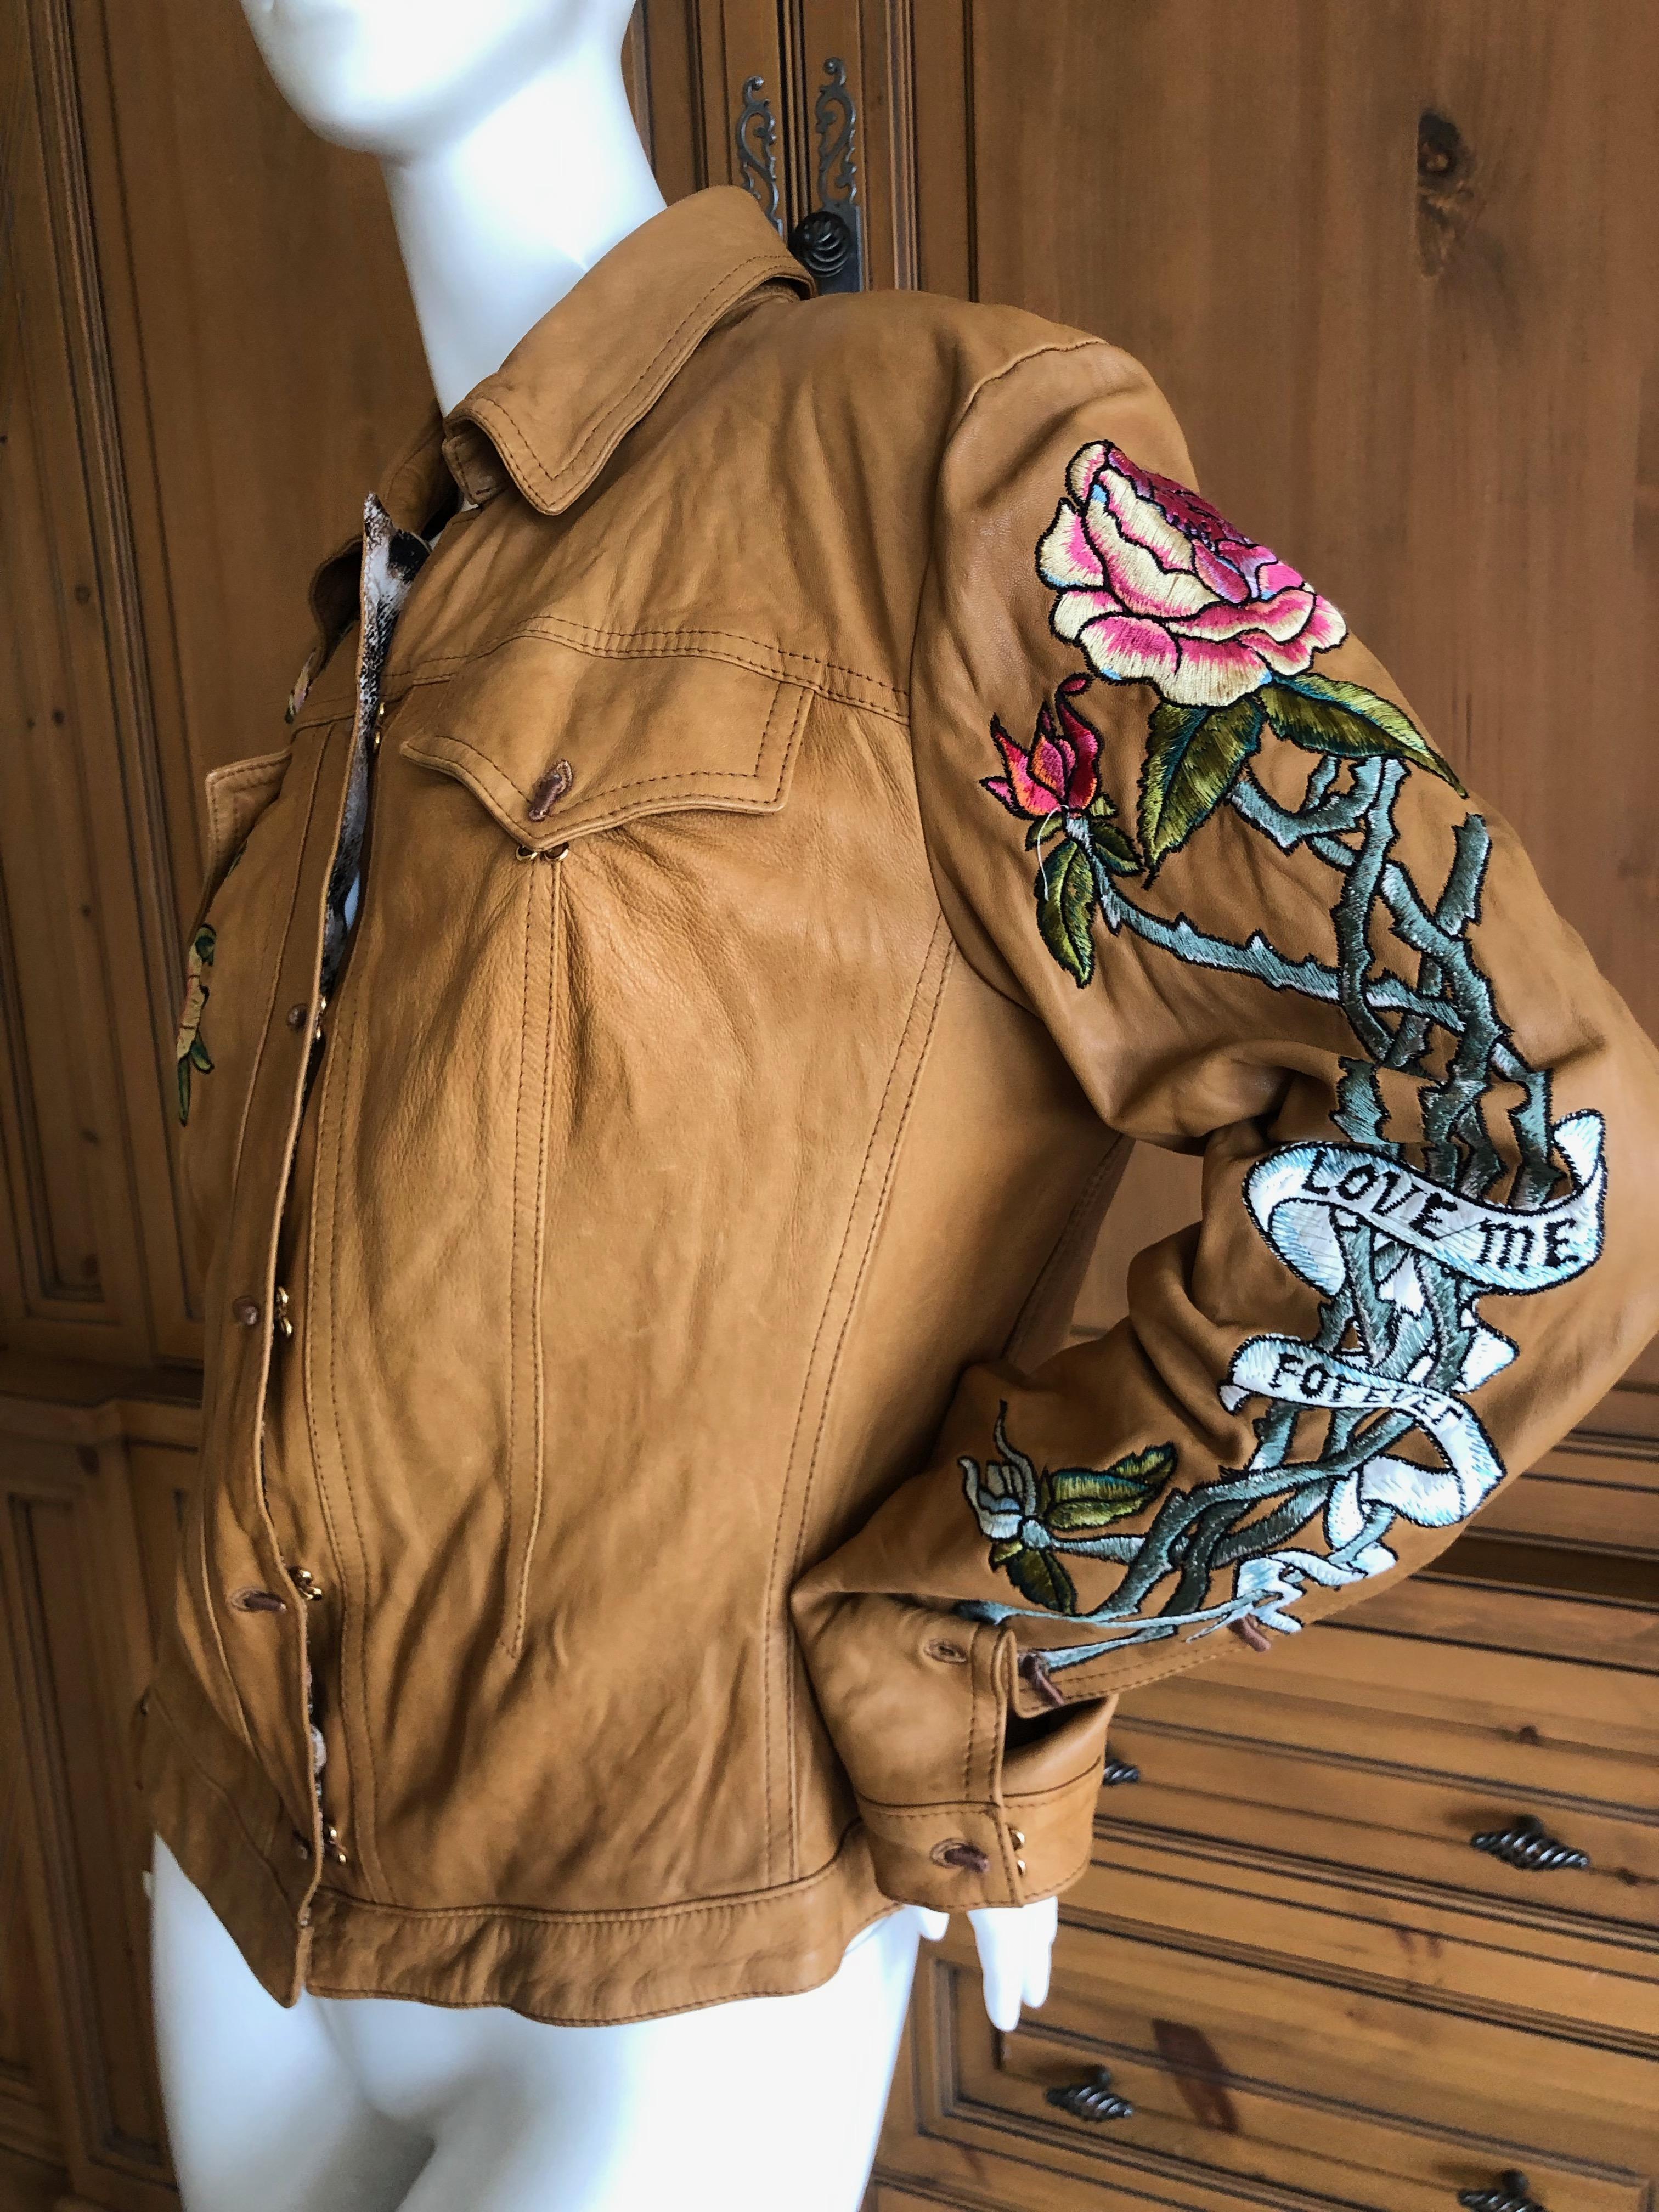 Roberto Cavalli Collectable Leather Jacket with Tattoo Embroidery 2003 In Excellent Condition For Sale In Cloverdale, CA